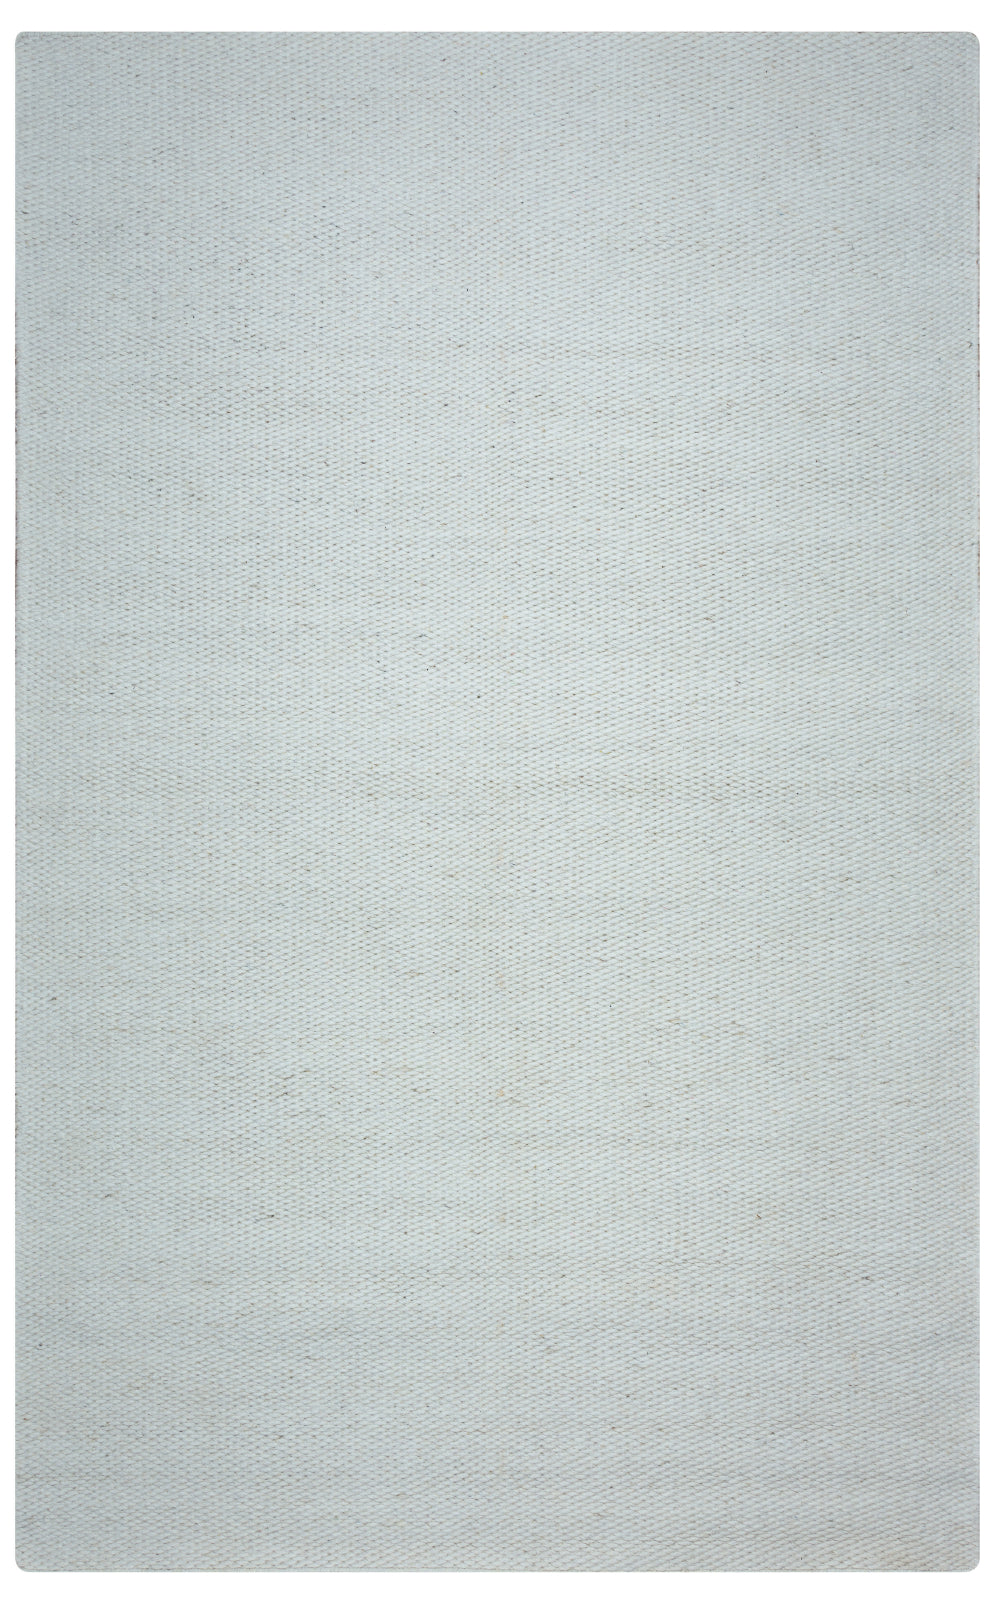 Rizzy Twist TW3065 Off White Area Rug main image